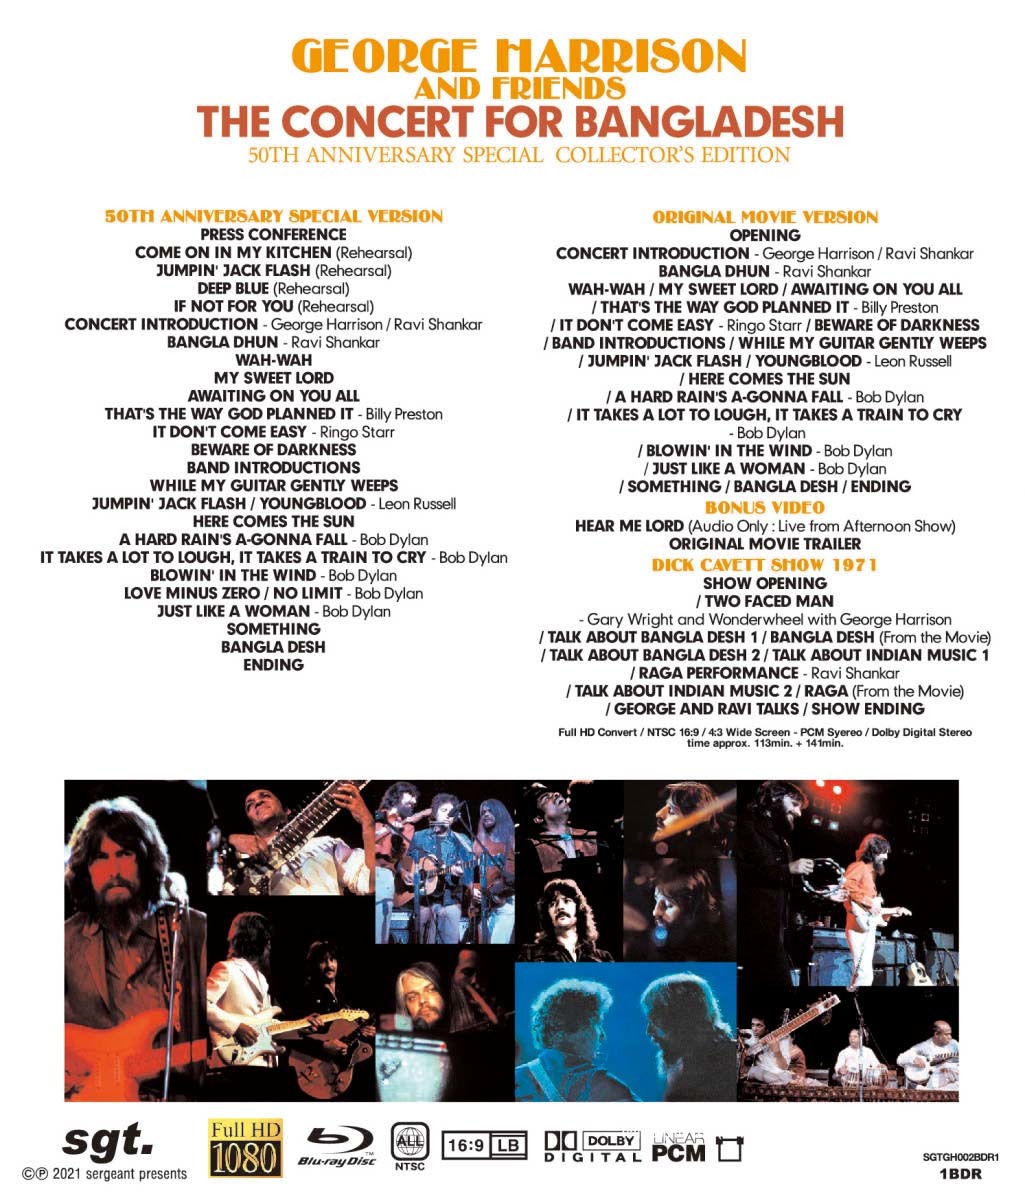 GEORGE HARRISON AND FRIENDS / THE CONCERT FOR BANGLADESH : 50TH ANNIVERSARY BLURAY DISC SPECIAL COLLECTOR'S EDITION 【1Blu-ray】_画像2